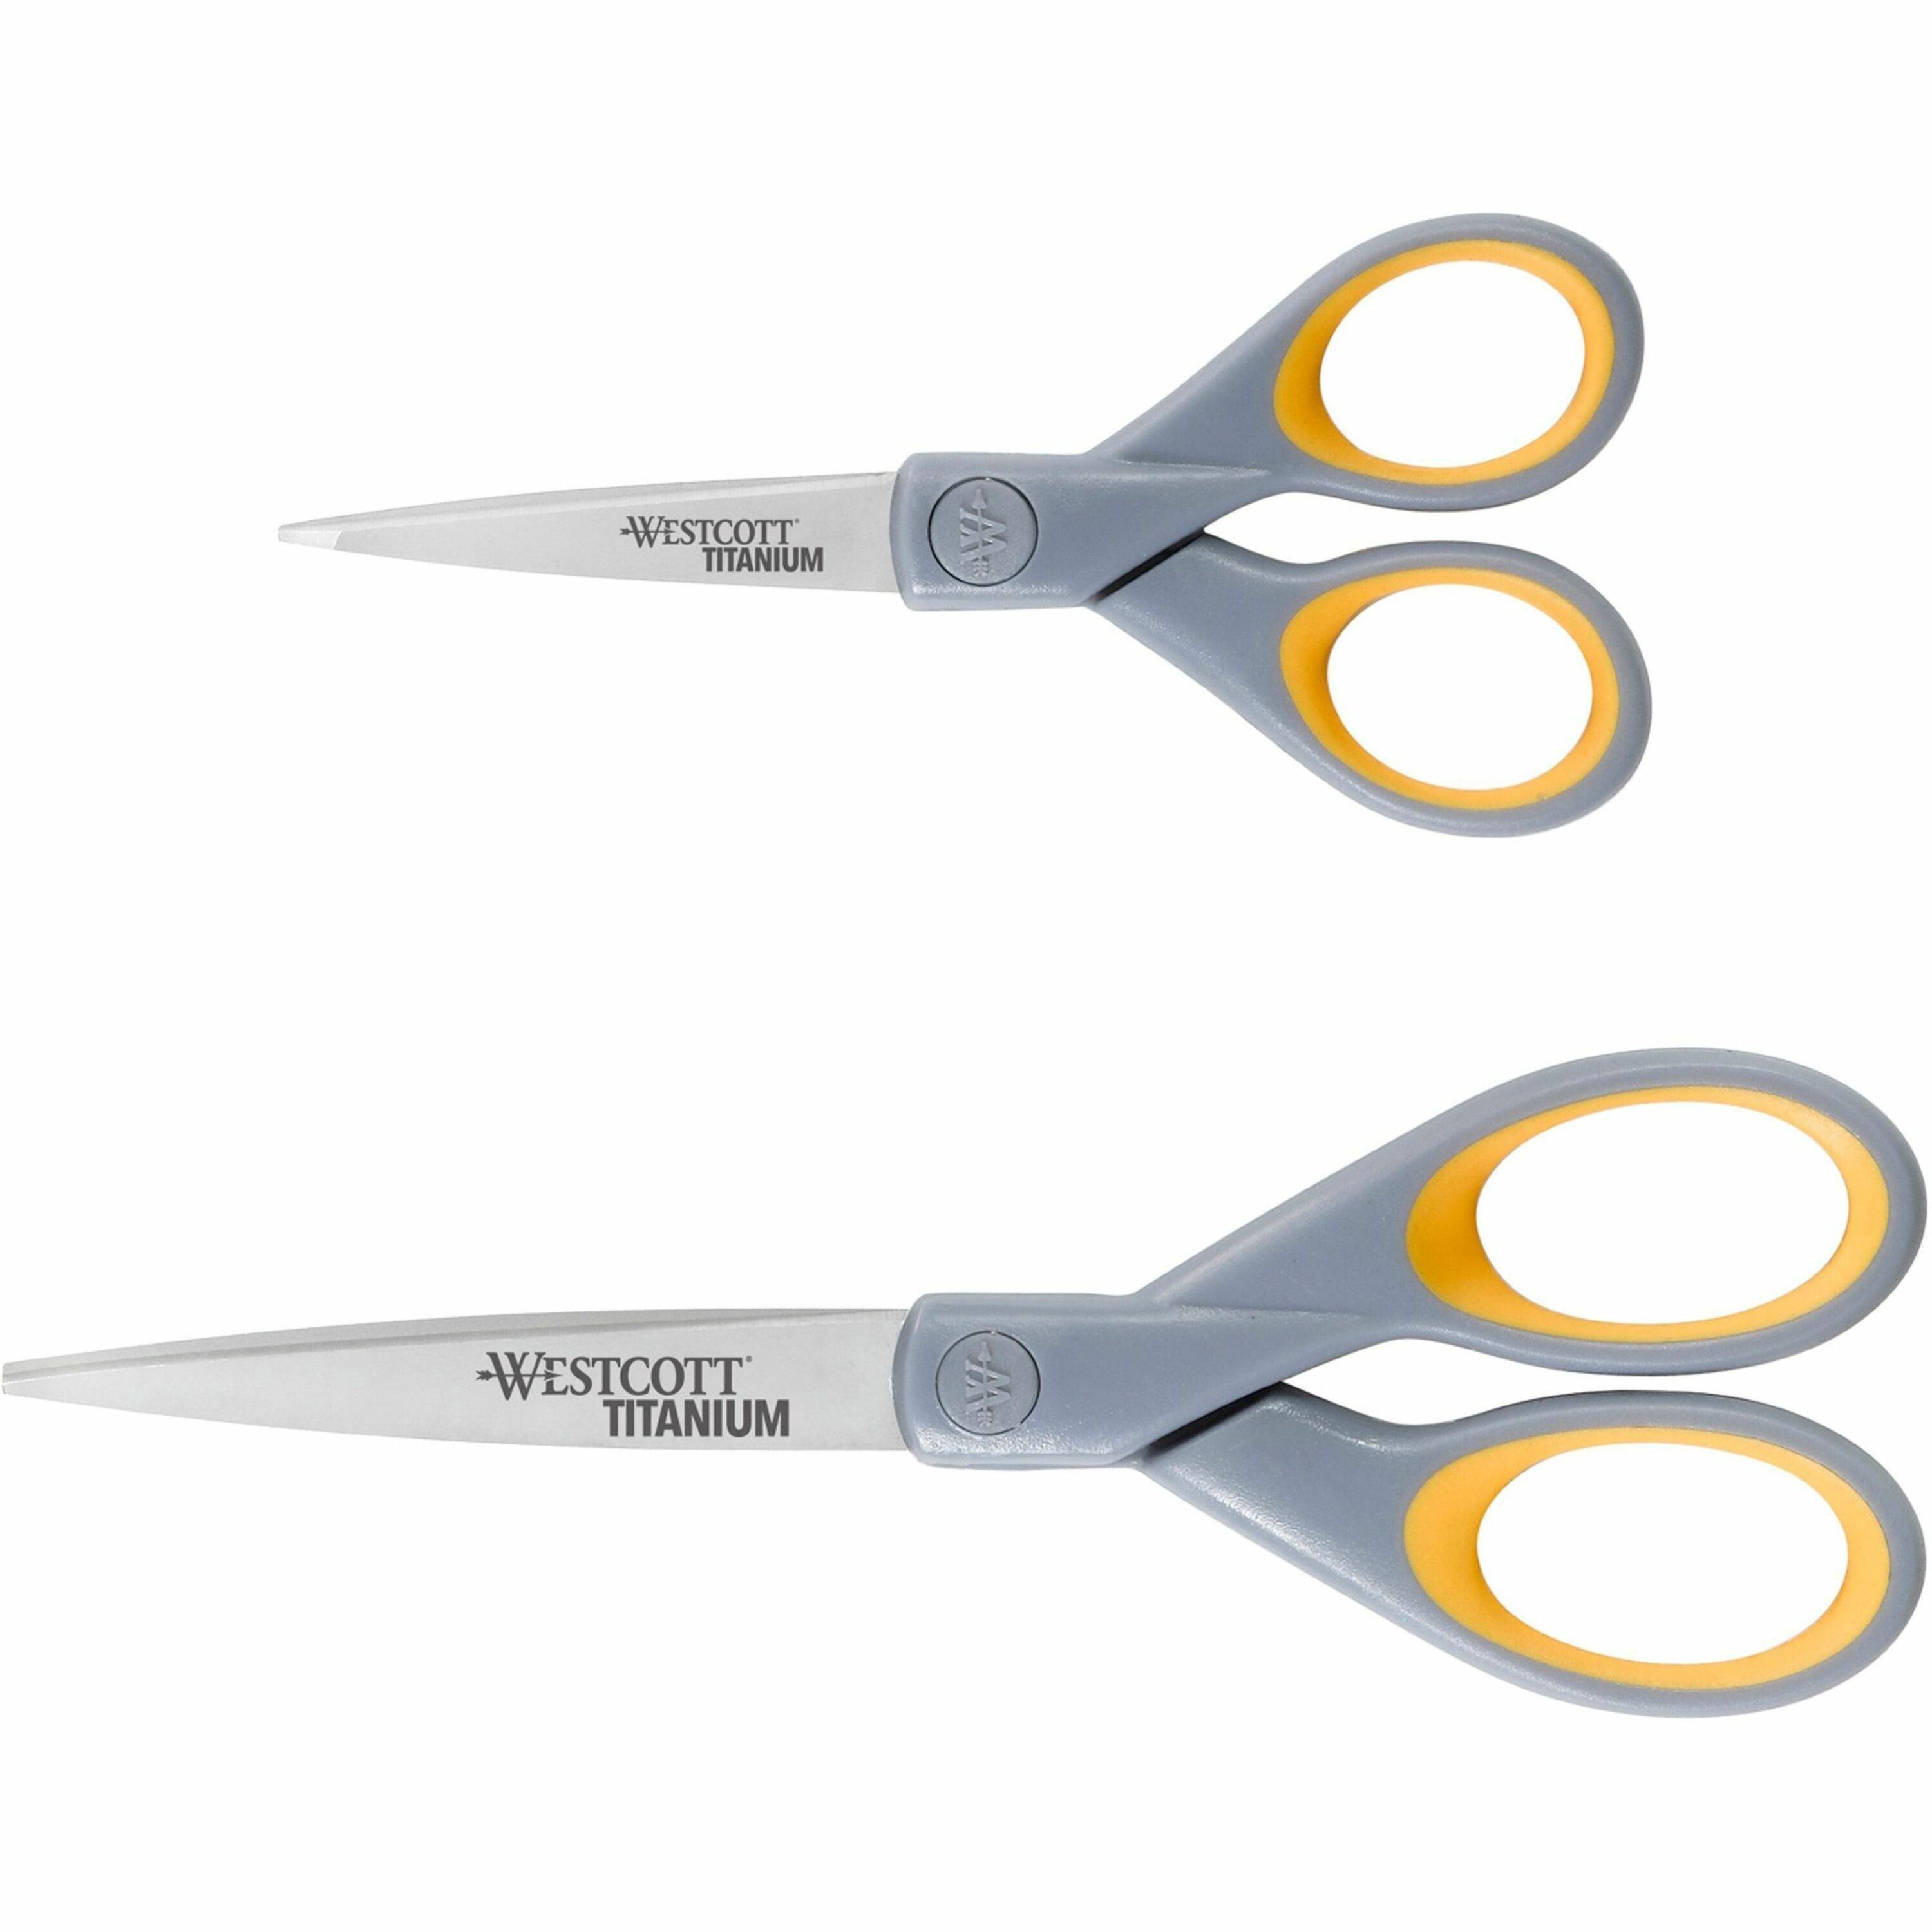 Sparco 5 Kids Pointed End Scissors, Red